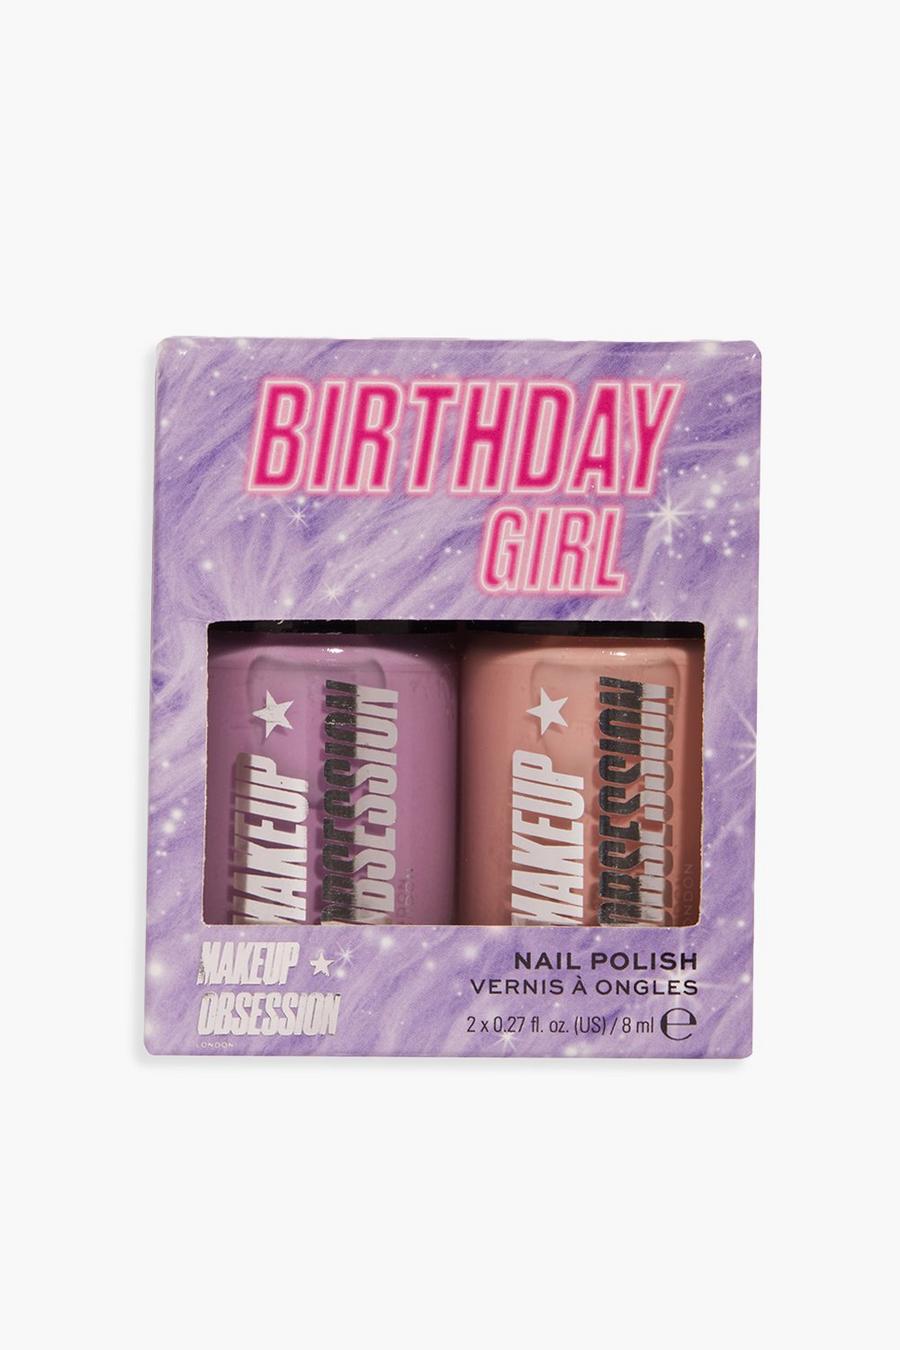 Makeup Obsession - Lot de 2 vernis à ongles - Birthday Girl, Multi image number 1